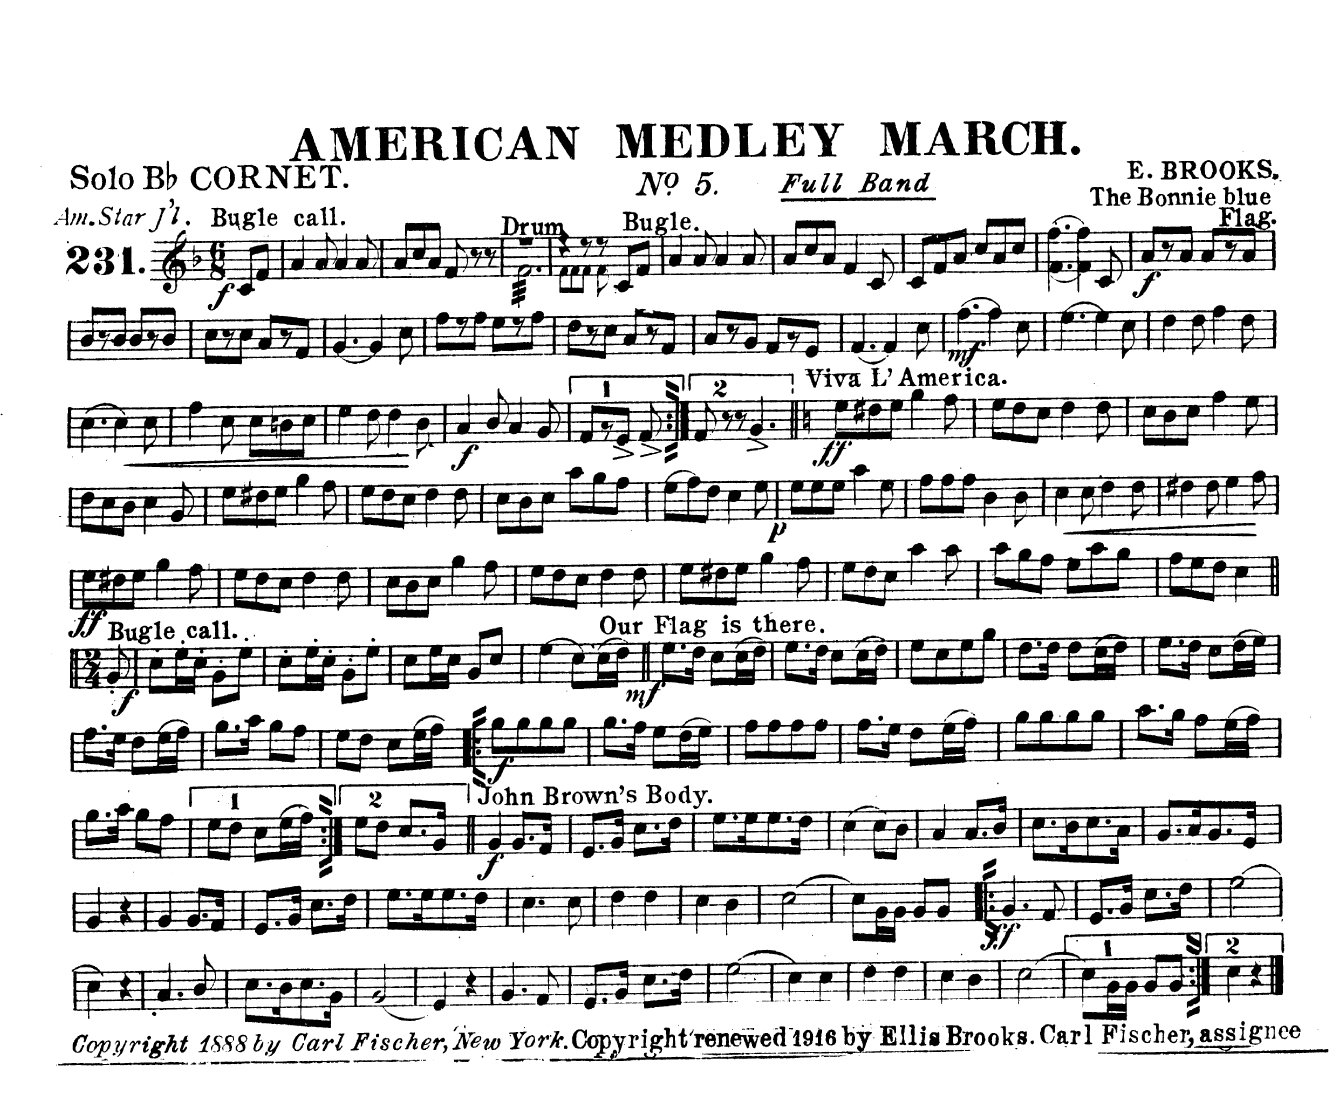 American Medley​ March #5 by E. Brooks